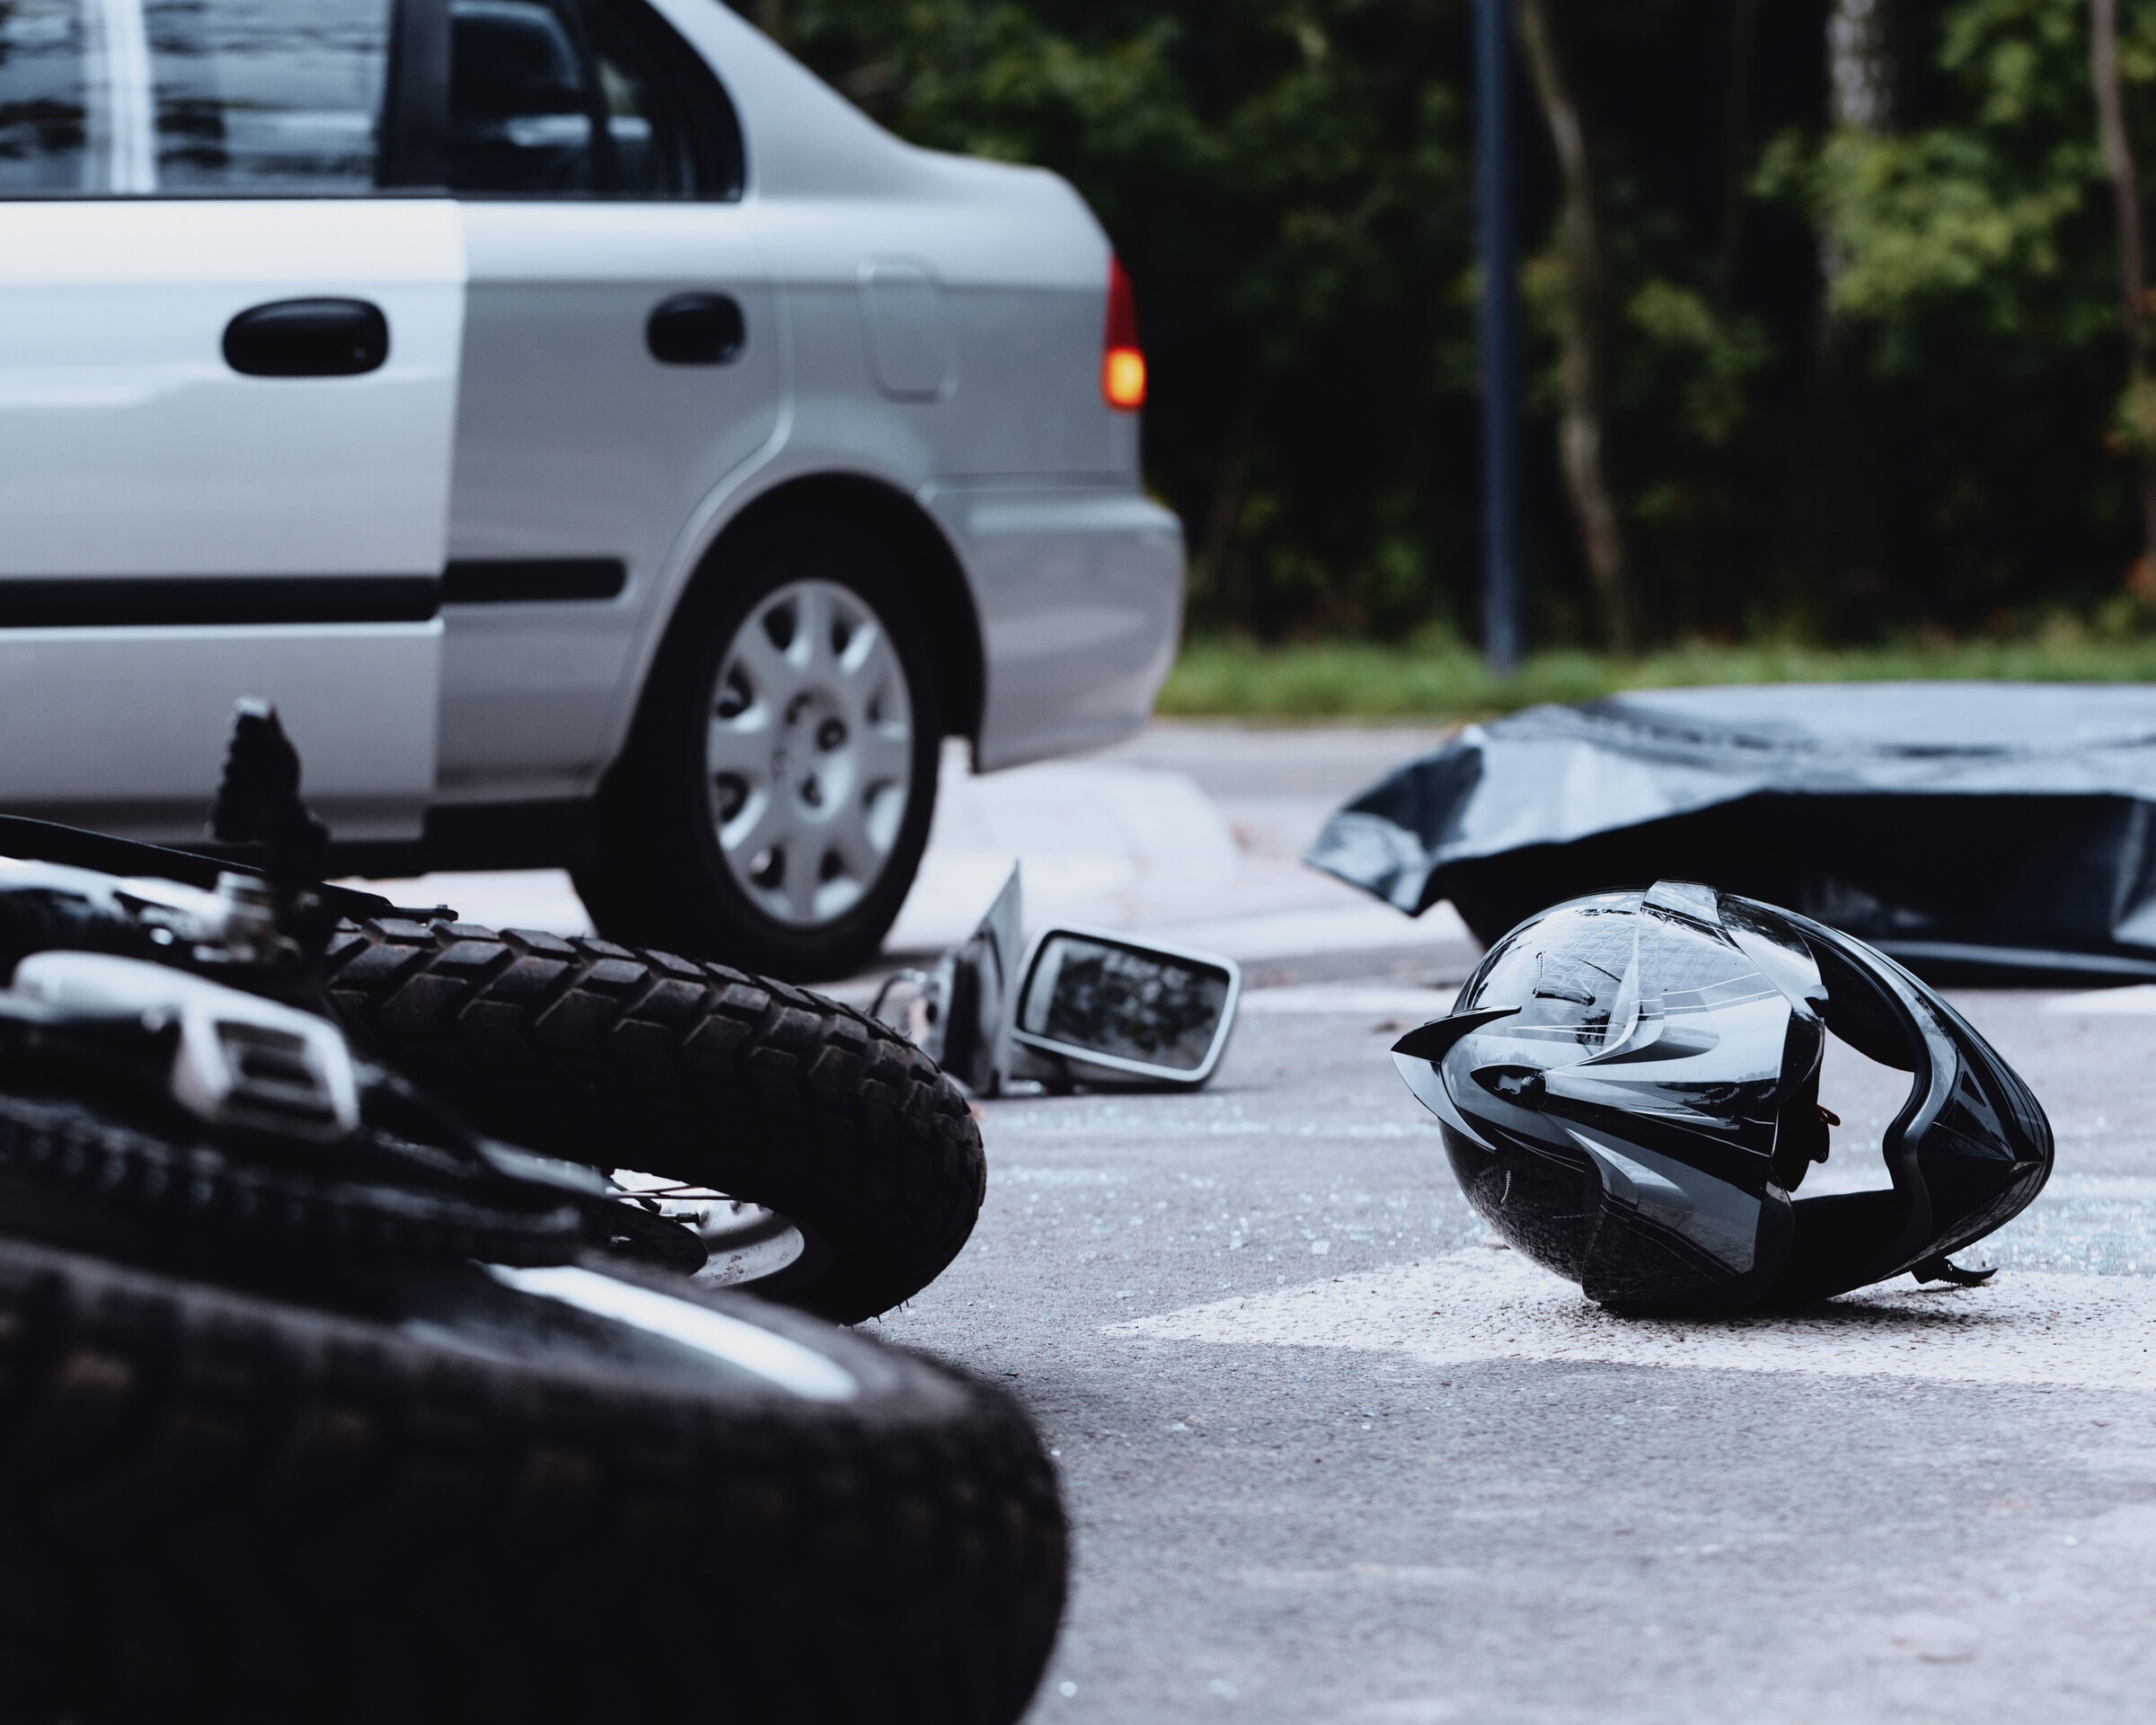 Reliable lawyers who are dedicated to providing support and guidance to those affected by car and motor vehicle accidents in Allentown